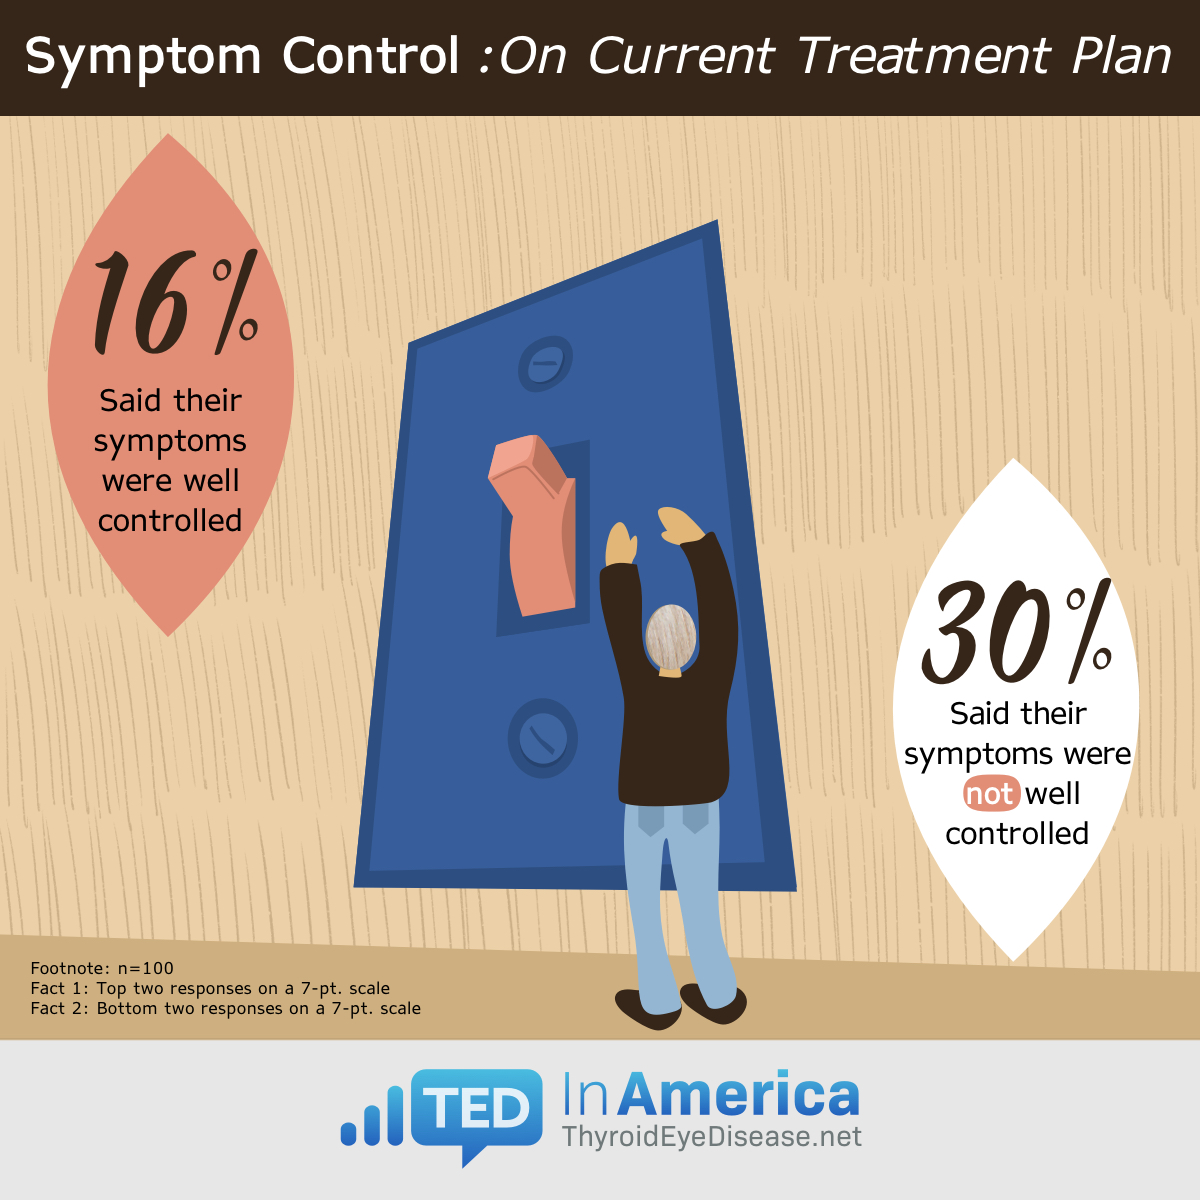 Symptom Control: on Current Treatment Plan: 16% said their symptoms were well controlled, and 30% said their symptoms were not well controlled.